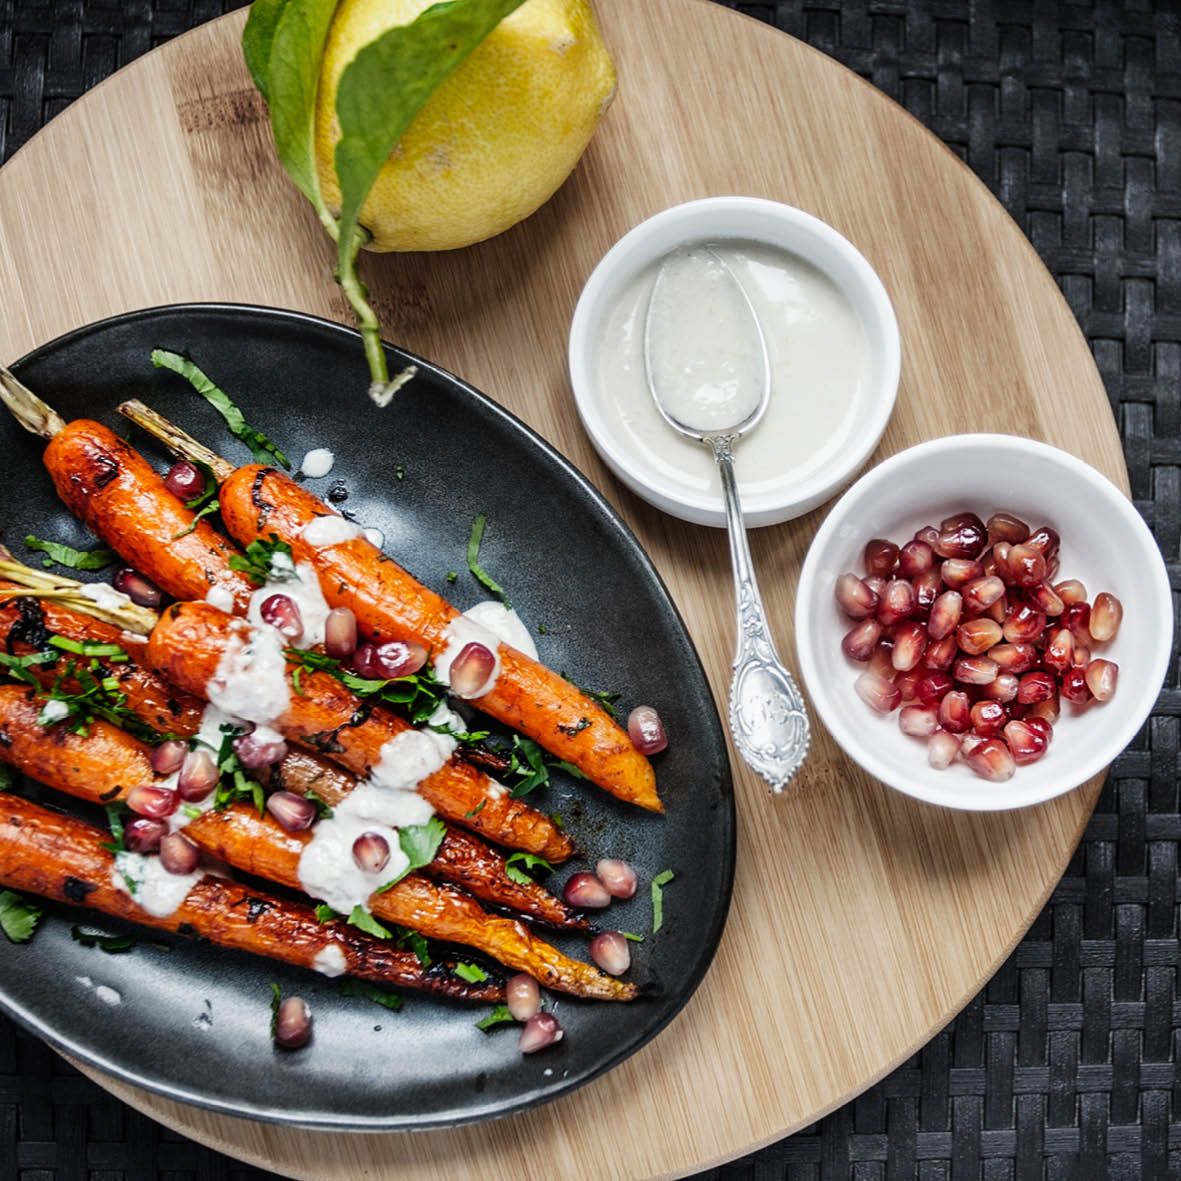 Honey-roasted carrots with tahini drizzle.jpg